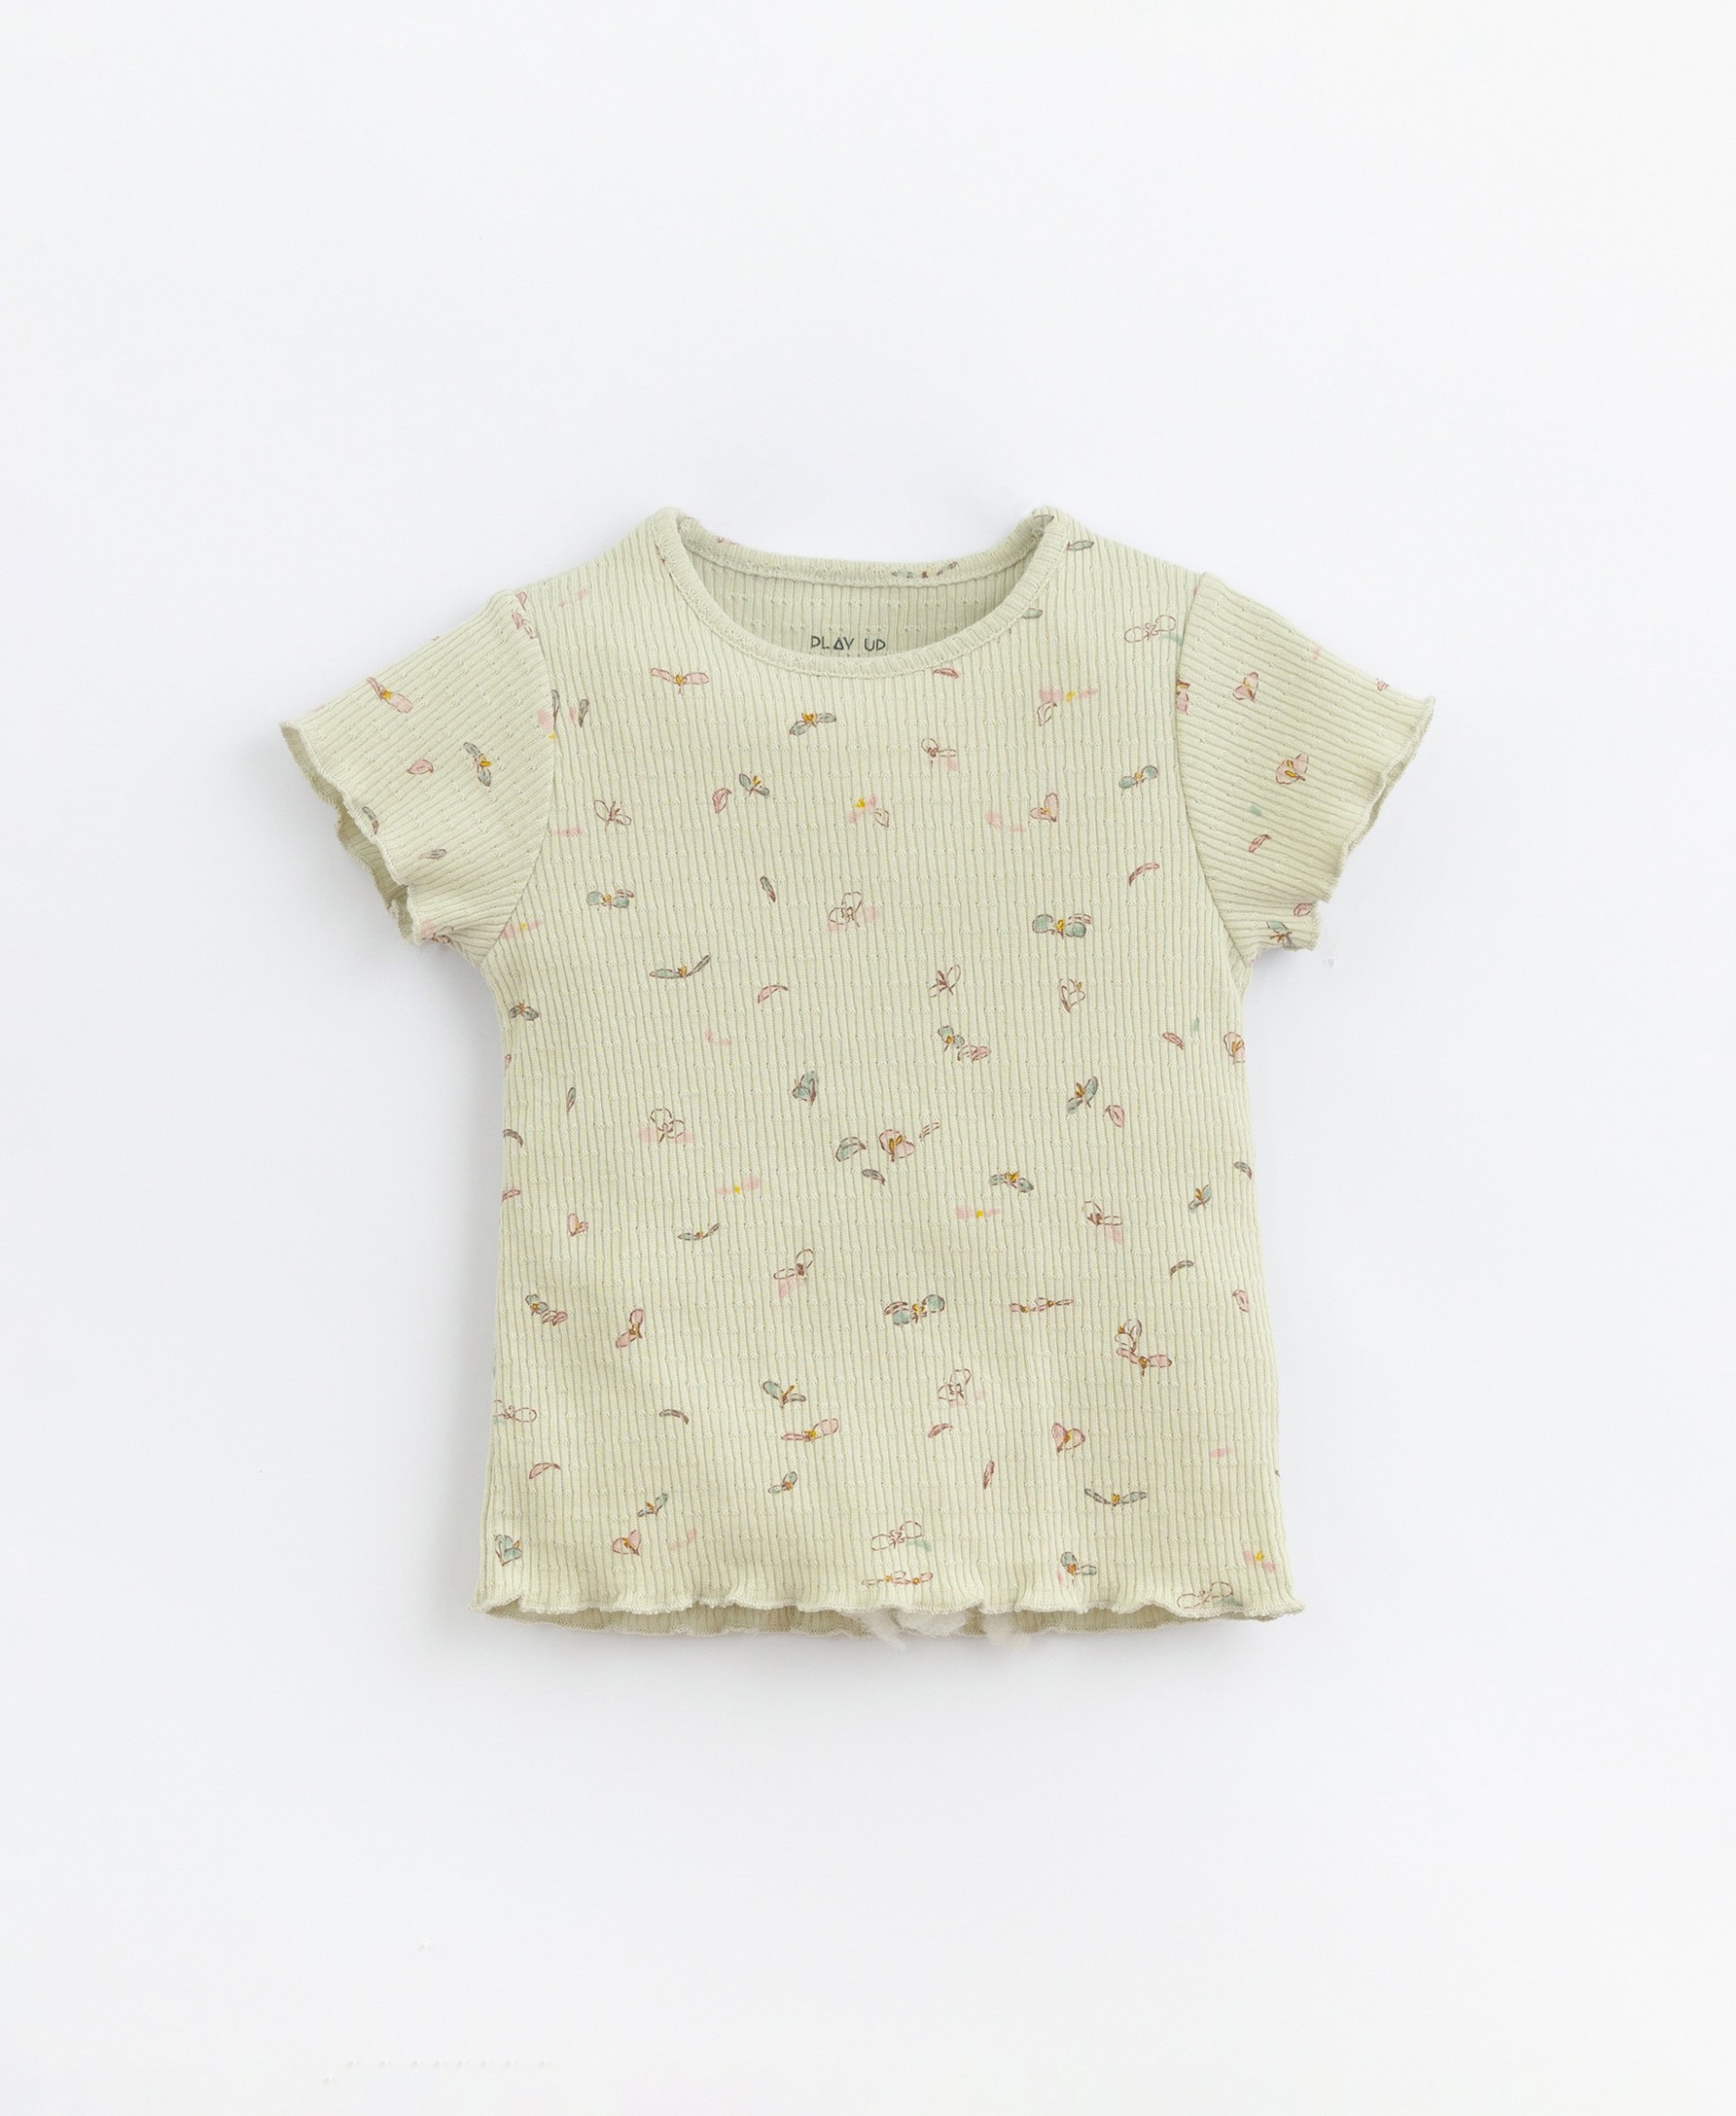 T-shirt in floral print | Basketry